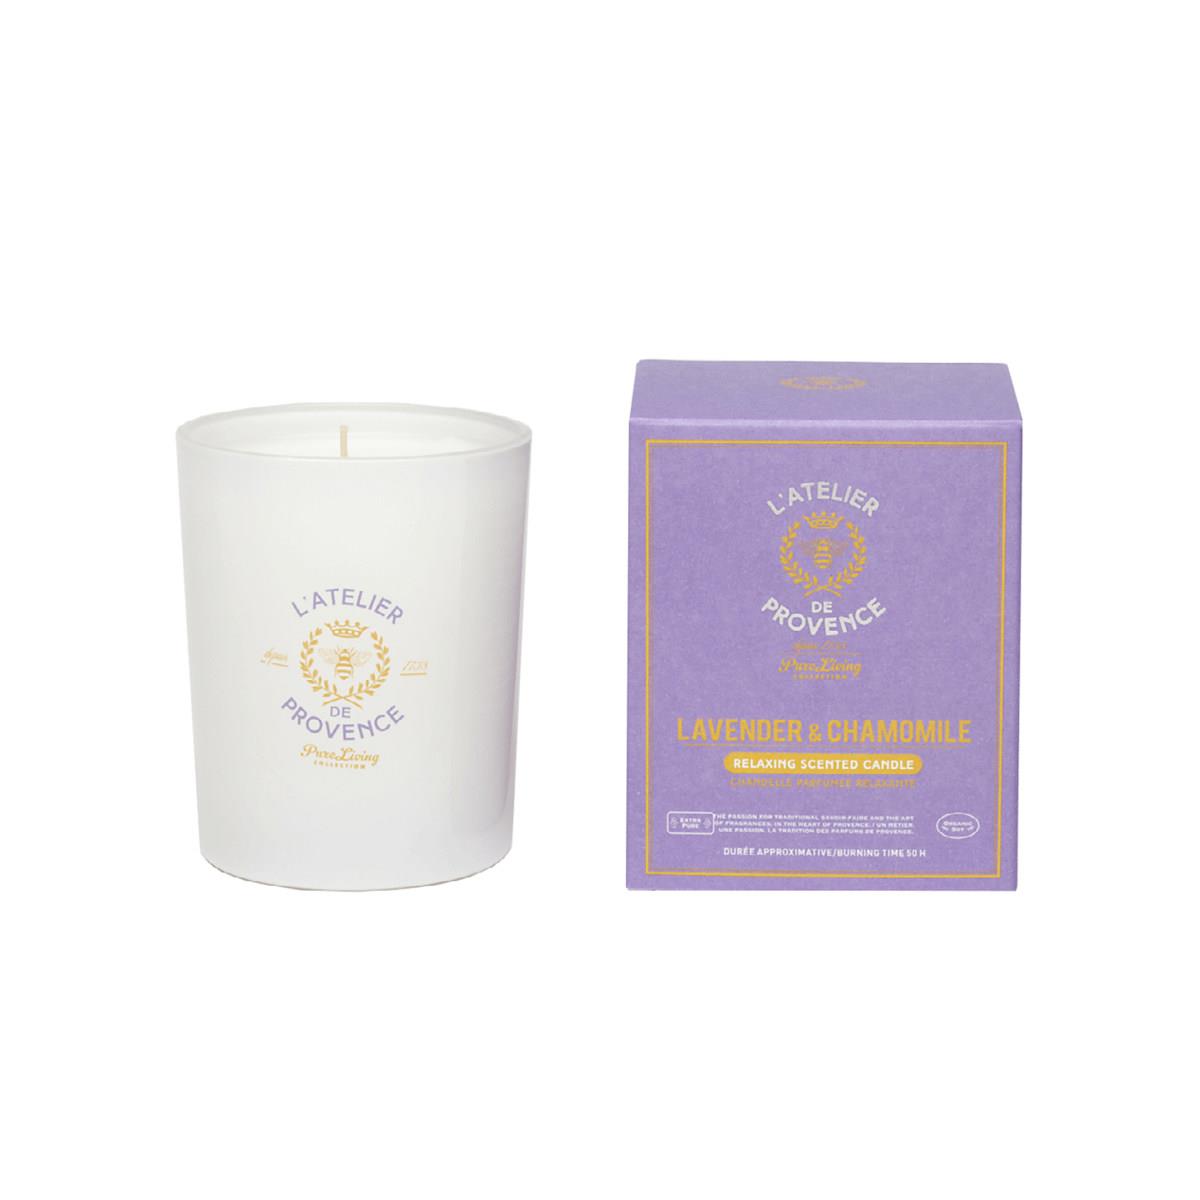 L'Atelier de Provence Lavender and Chamomile Relaxing Candle, 50 Hours